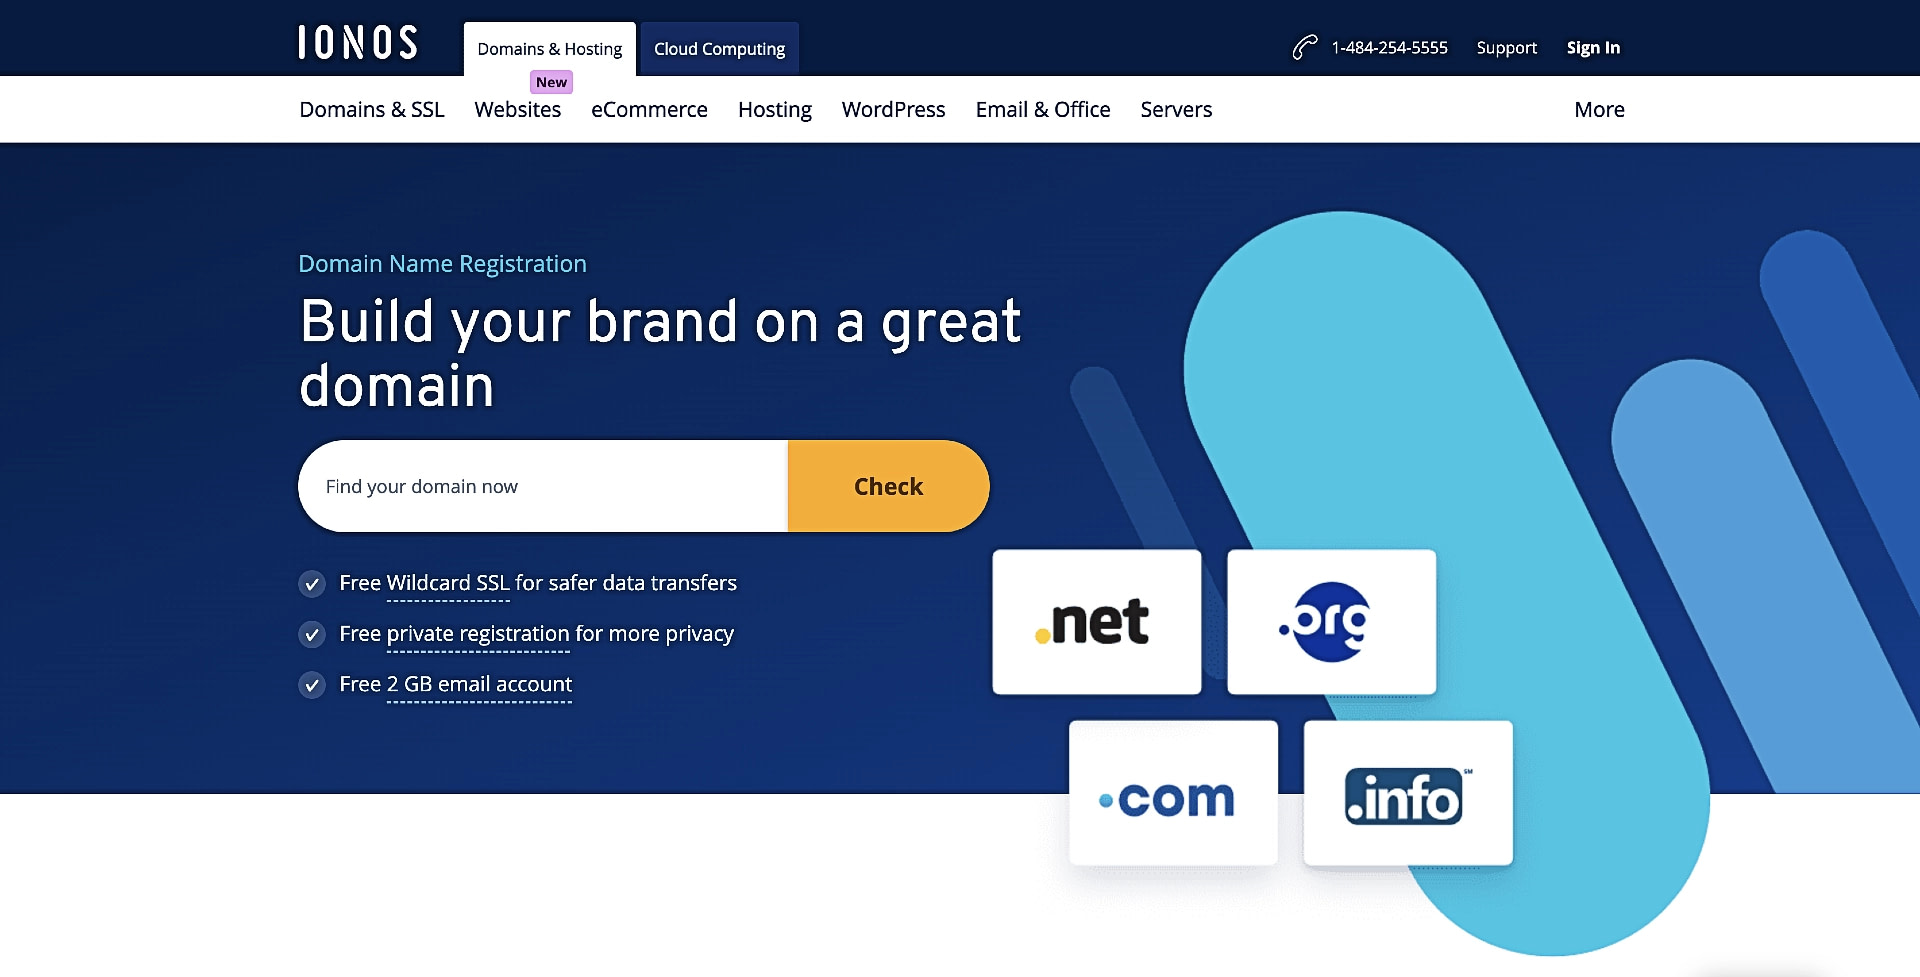 1&1 IONOS is among the best domain registrars.